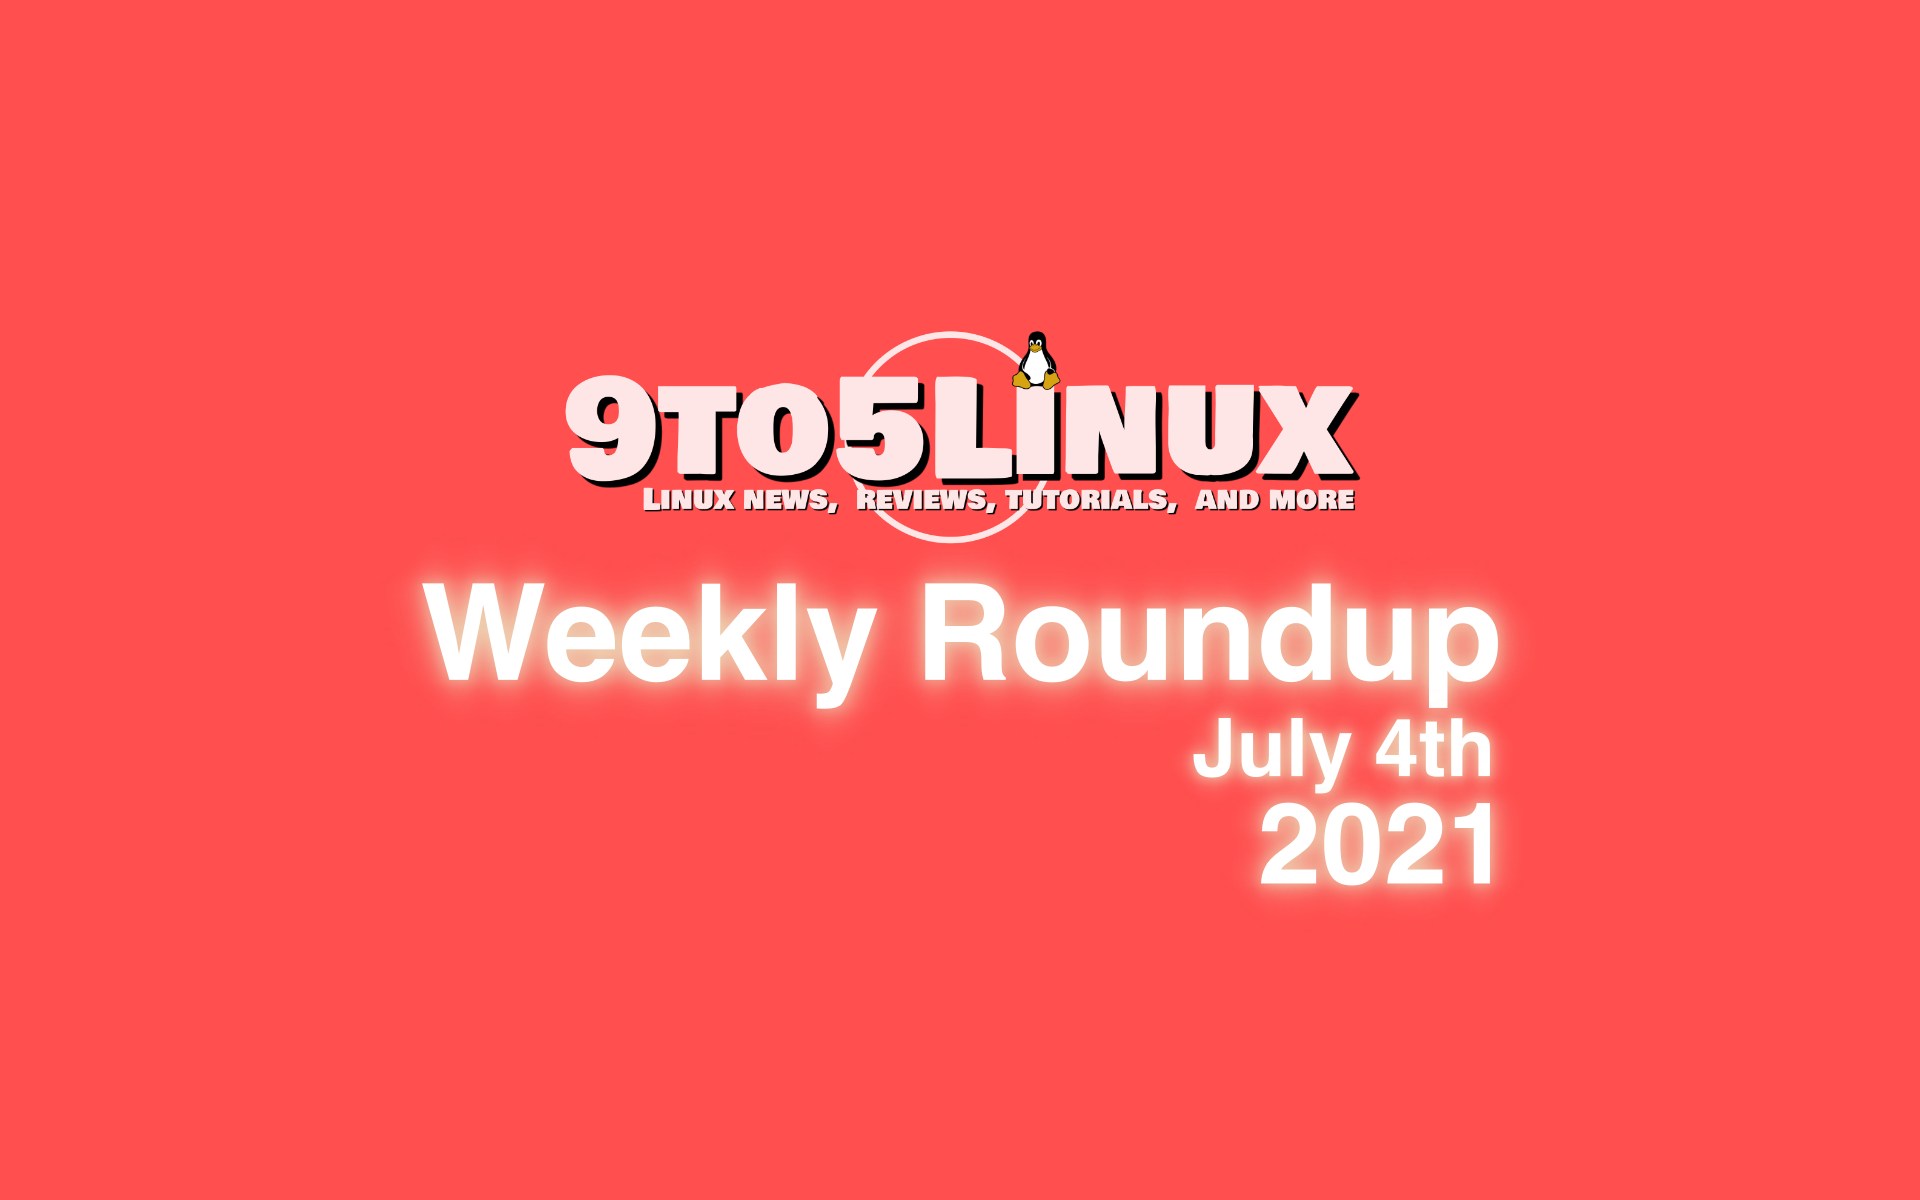 9to5Linux Weekly Roundup: July 4th, 2021